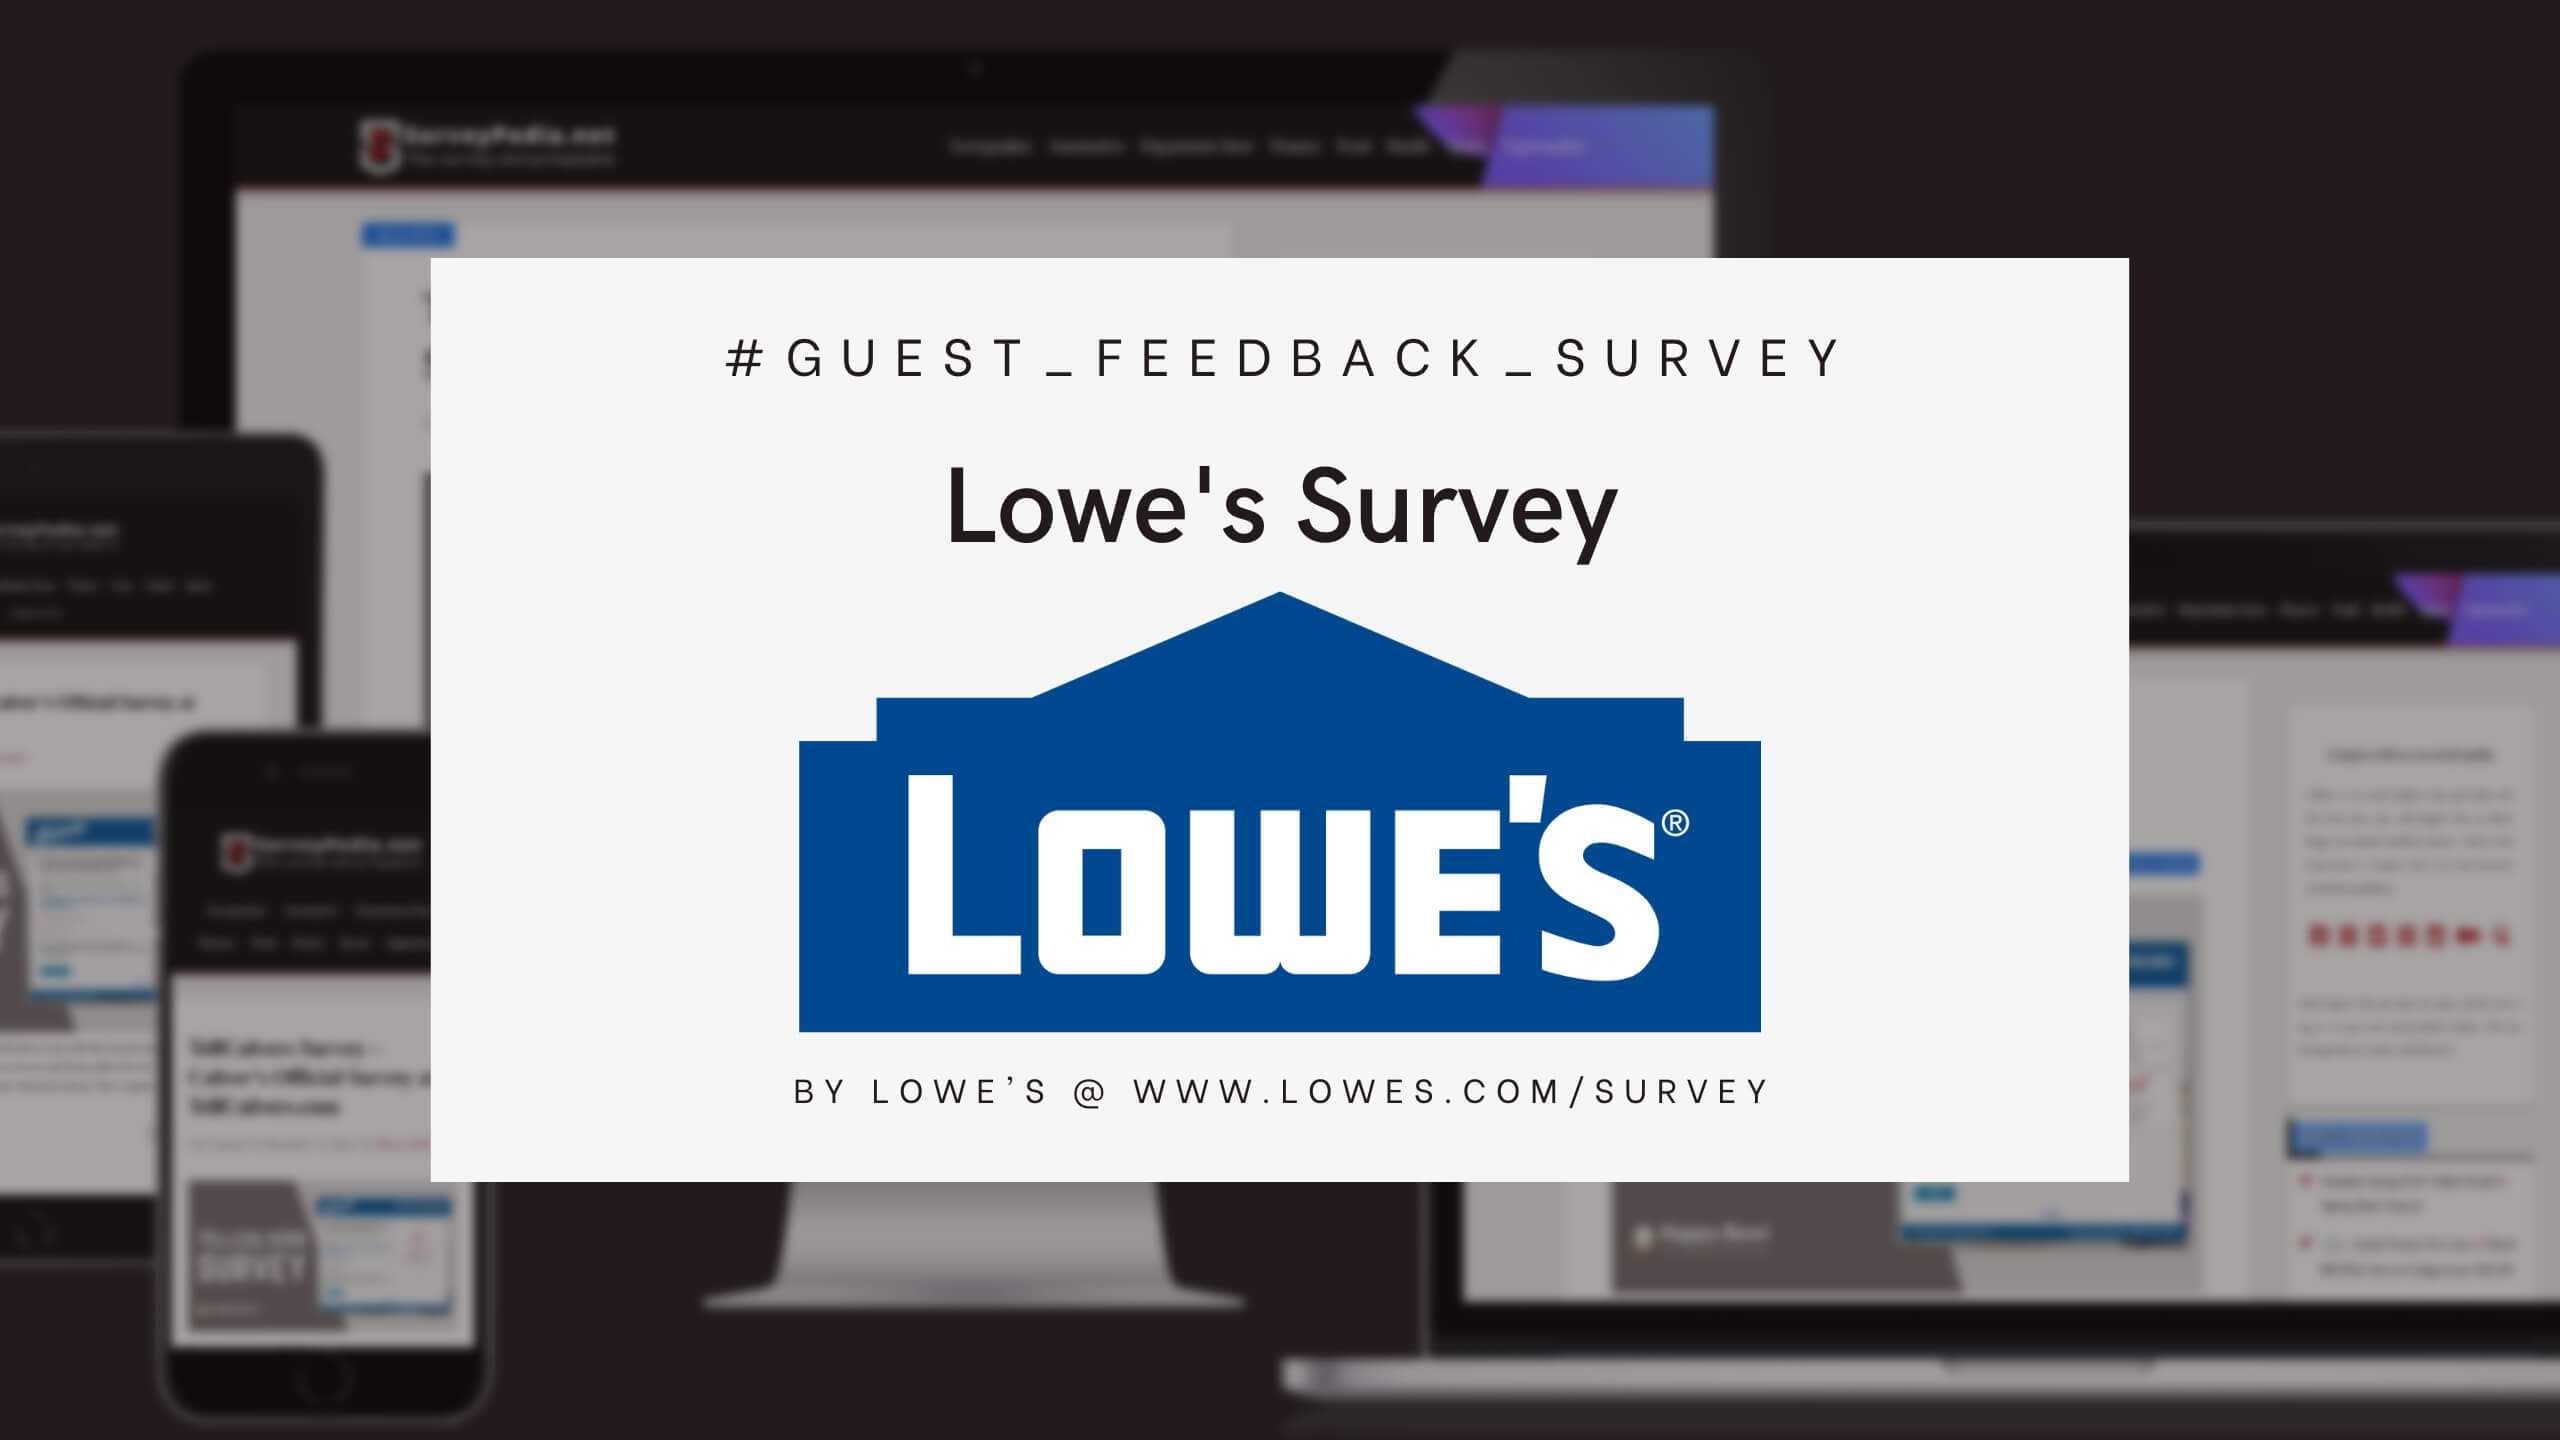 Lowes Survey Survey: Lowes Official Customer Feedback Survey at www.lowes.com/survey